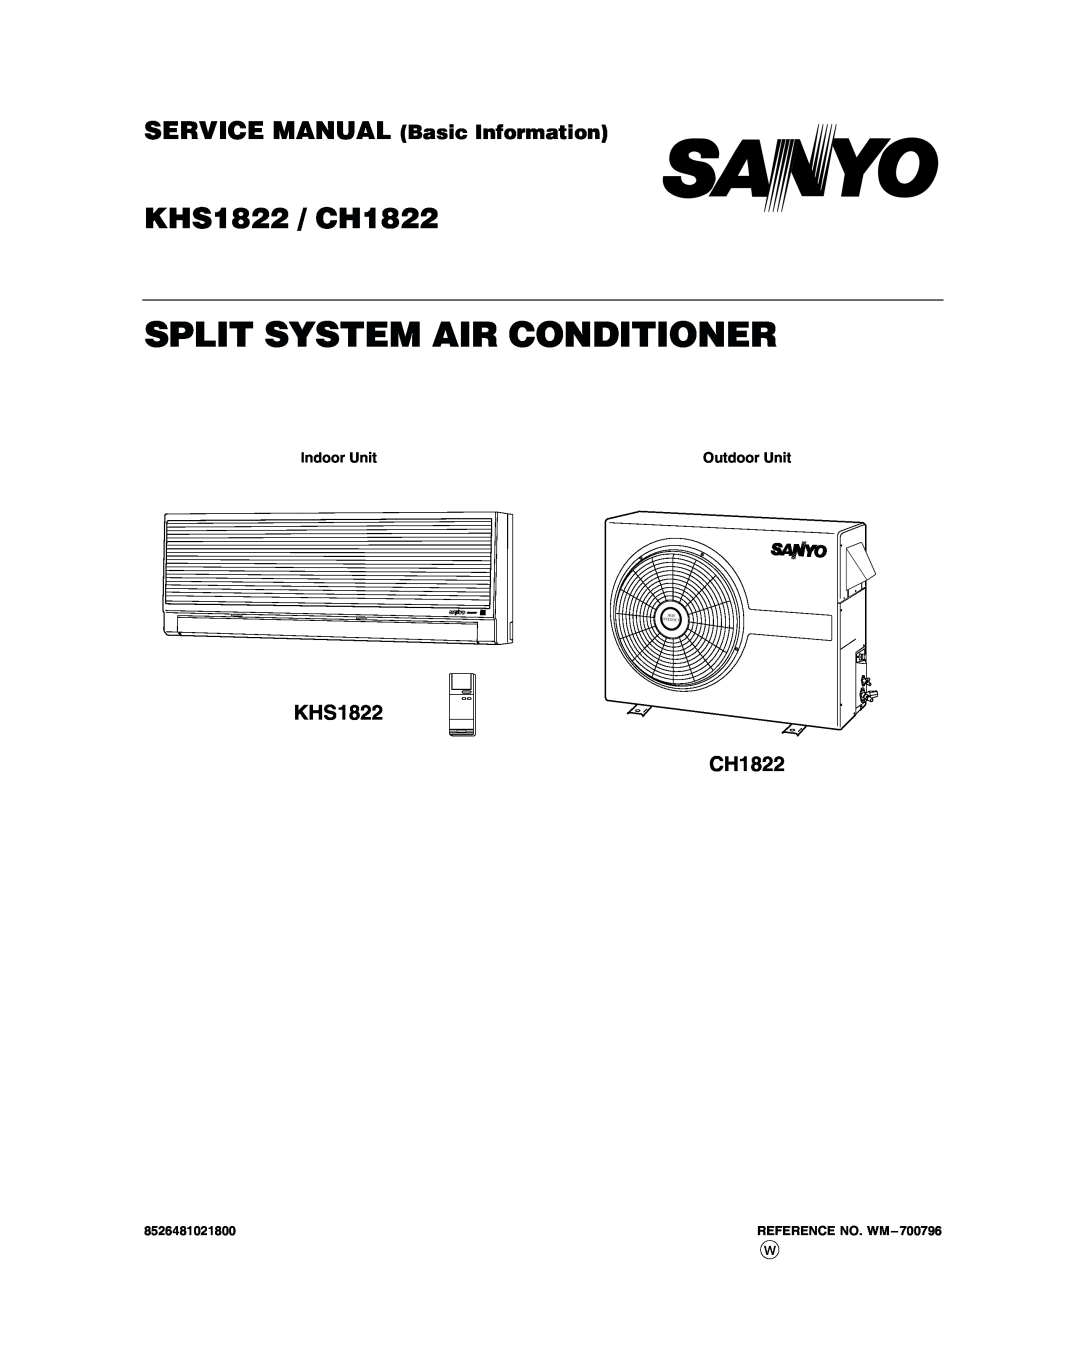 Sanyo service manual Split System Air Conditioner, KHS1822 / CH1822, KHS1822 CH1822, Indoor Unit, Outdoor Unit, High 